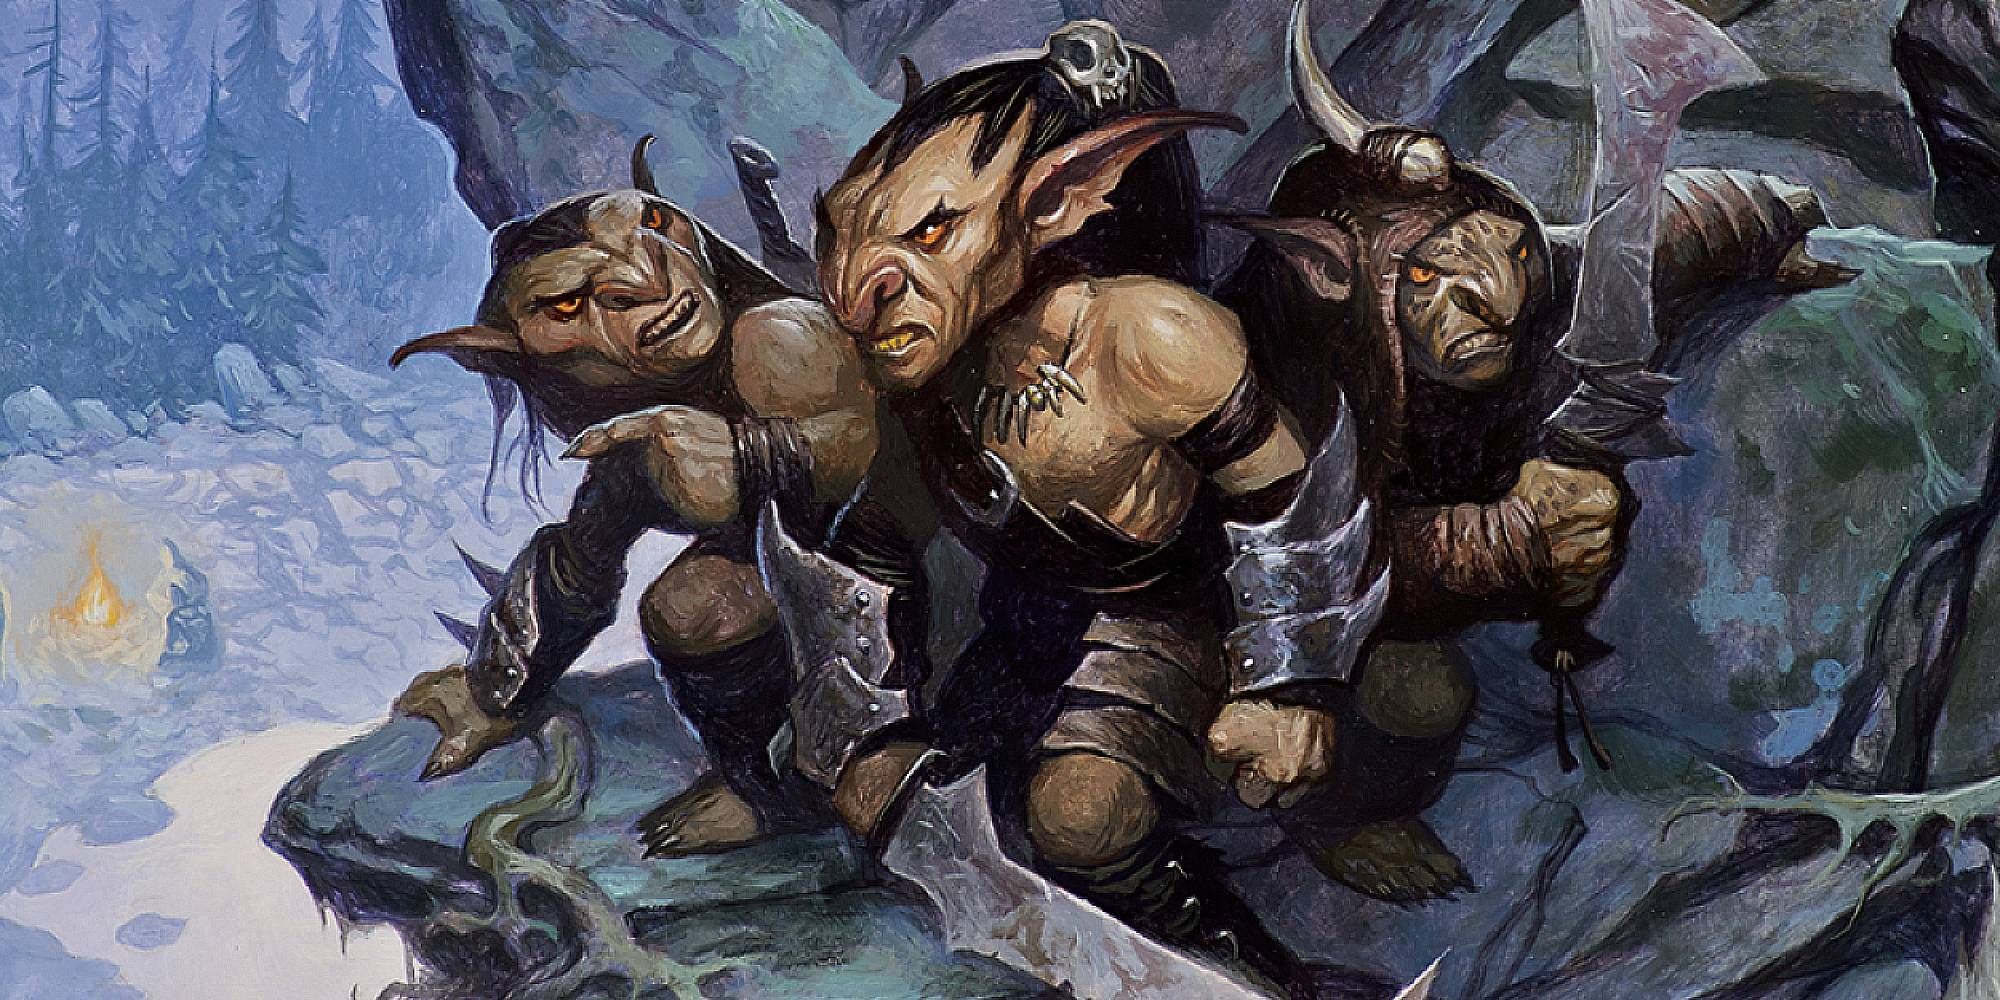 Three goblins stand on a rocky cliffside